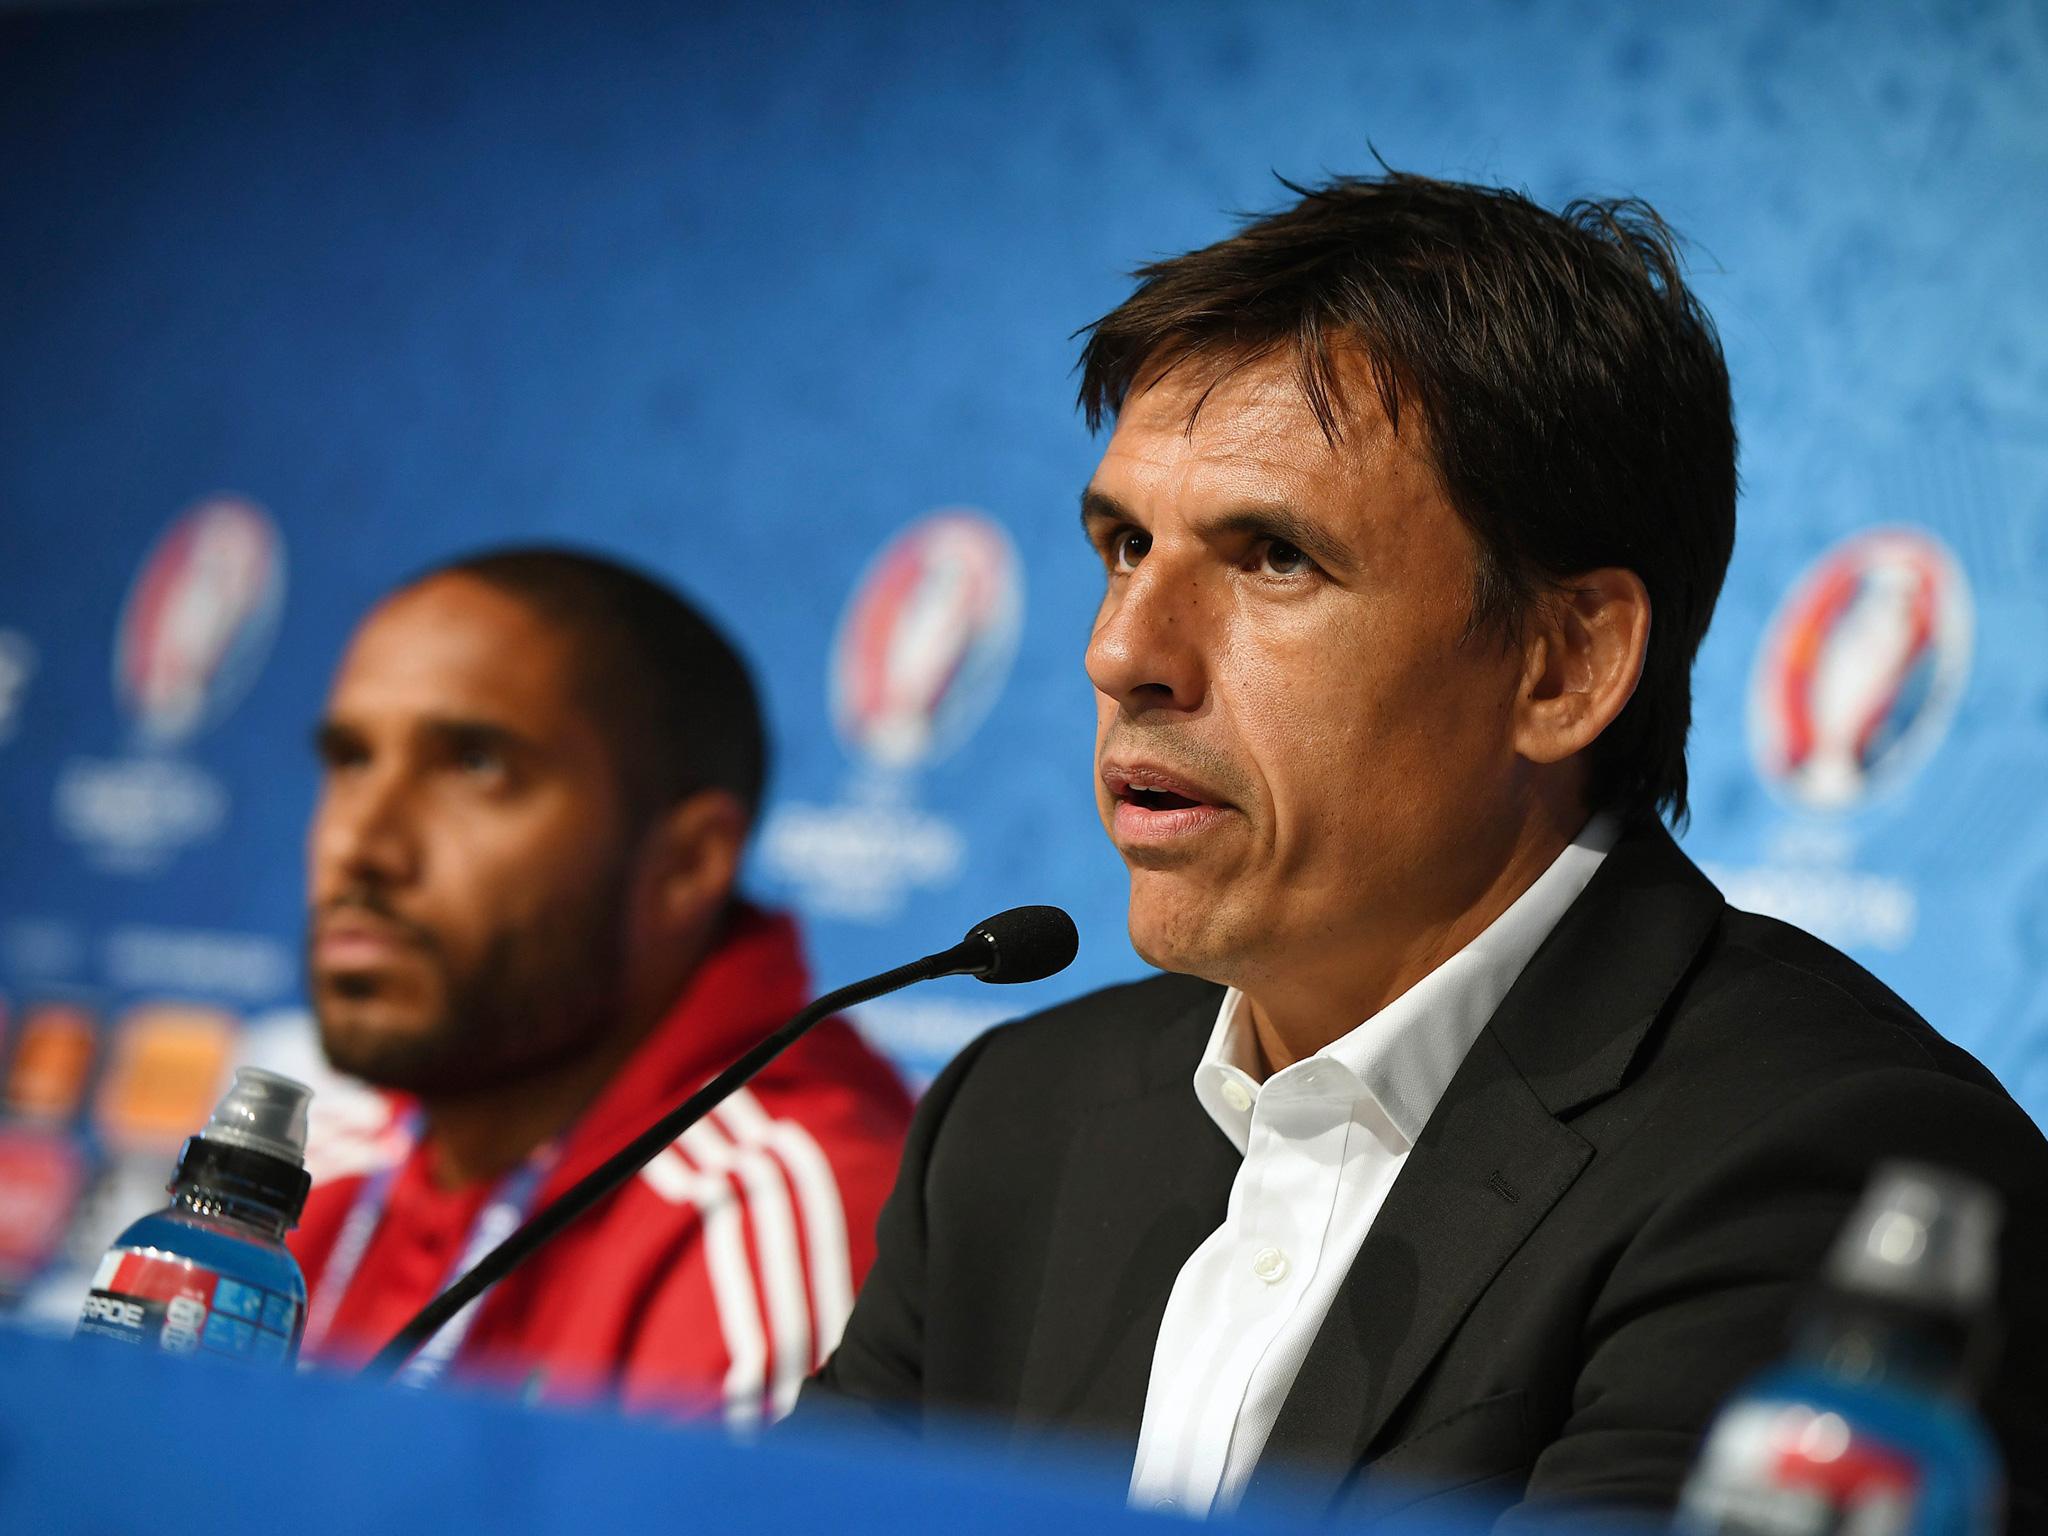 &#13;
Chris Coleman had reservations about succeeding his friend, the late Gary Speed &#13;